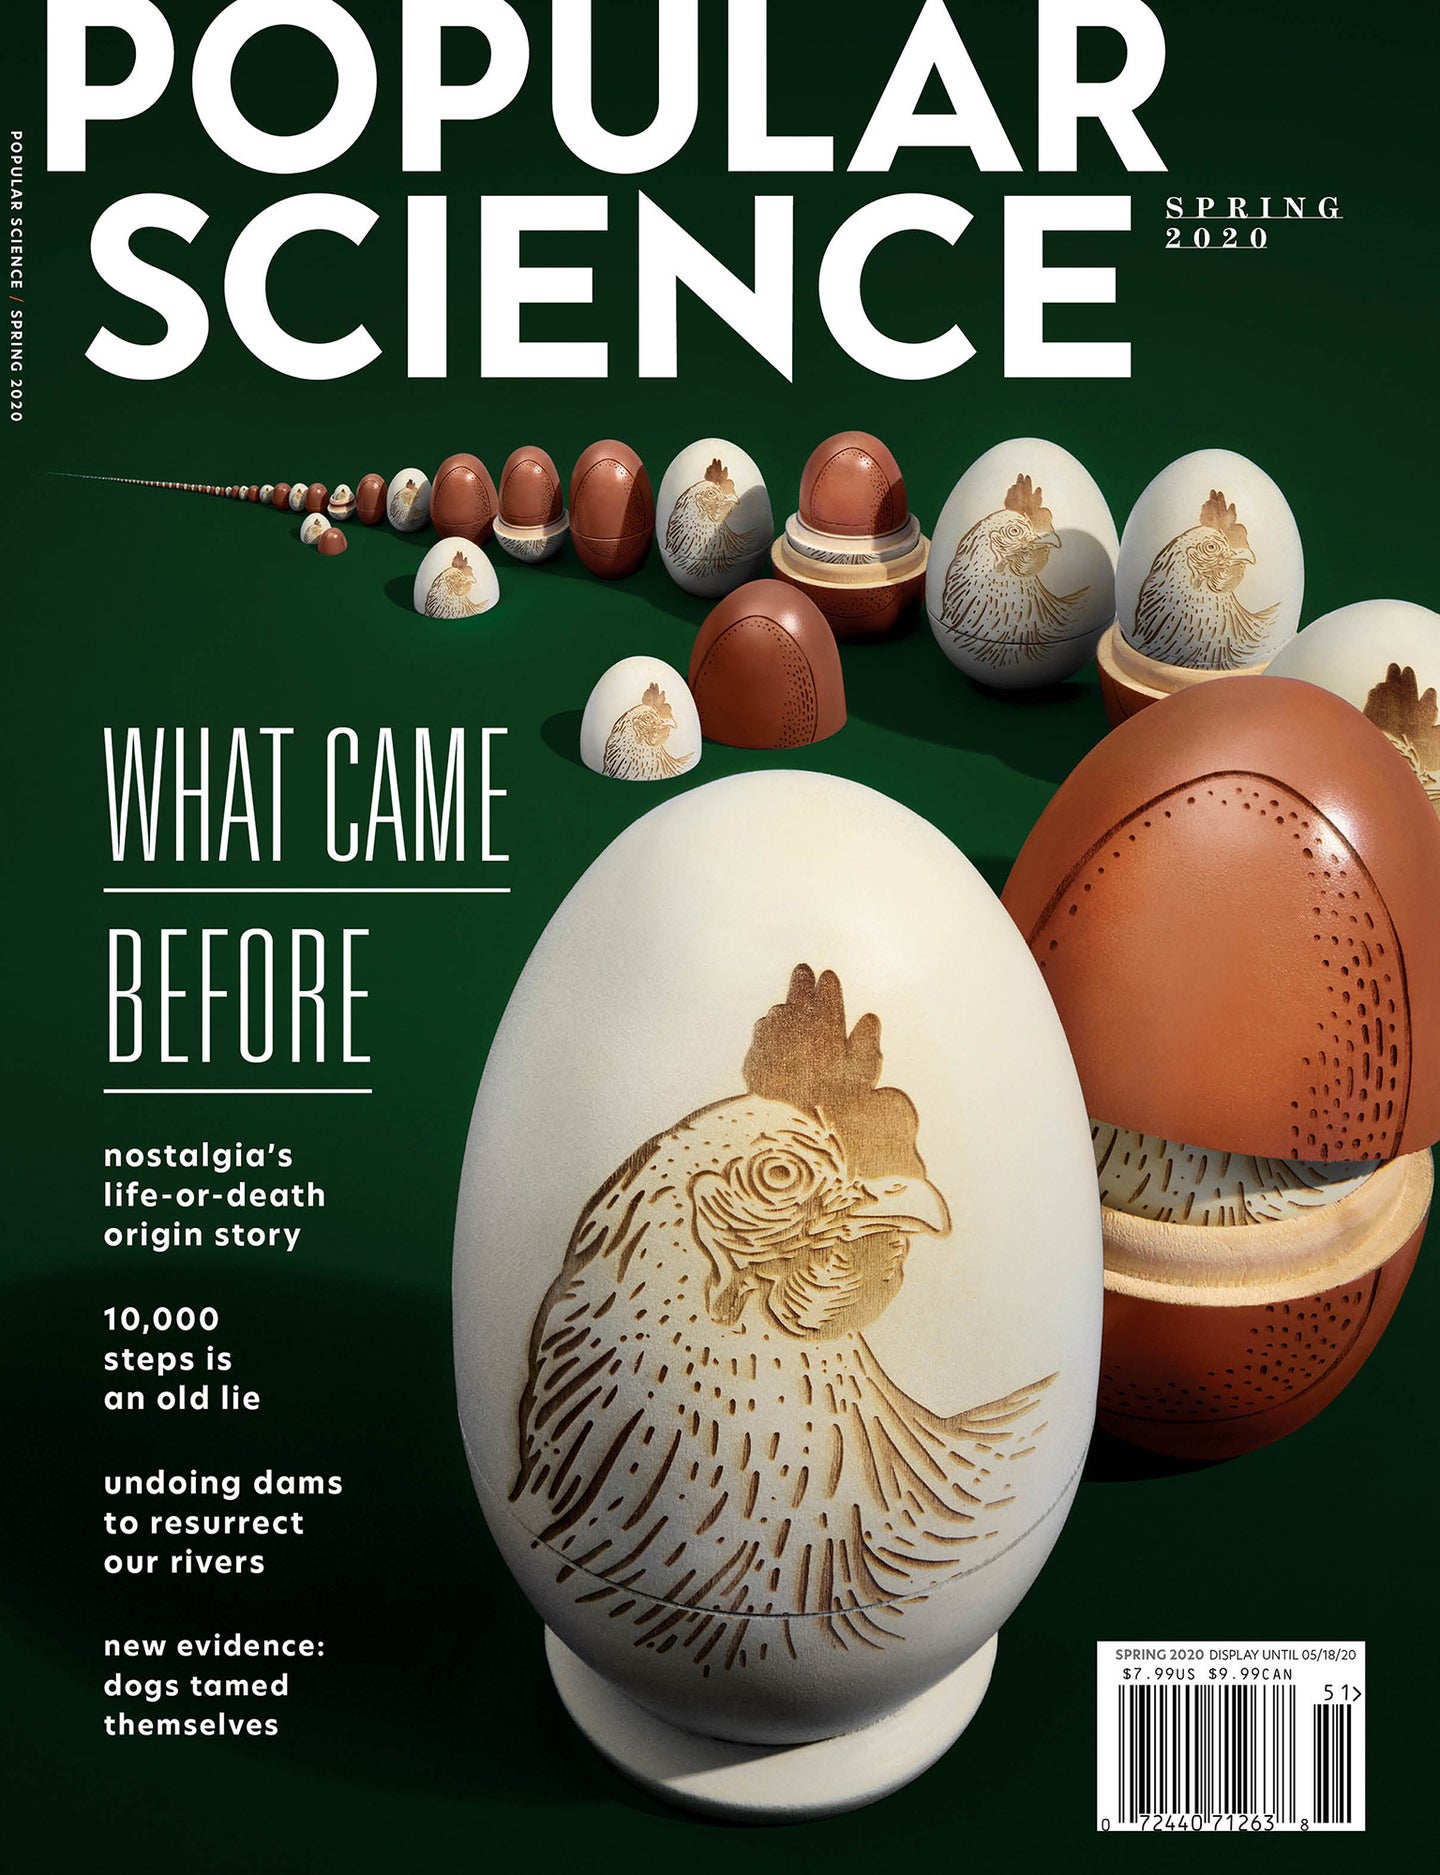 Popular Science Spring 2020 issue cover